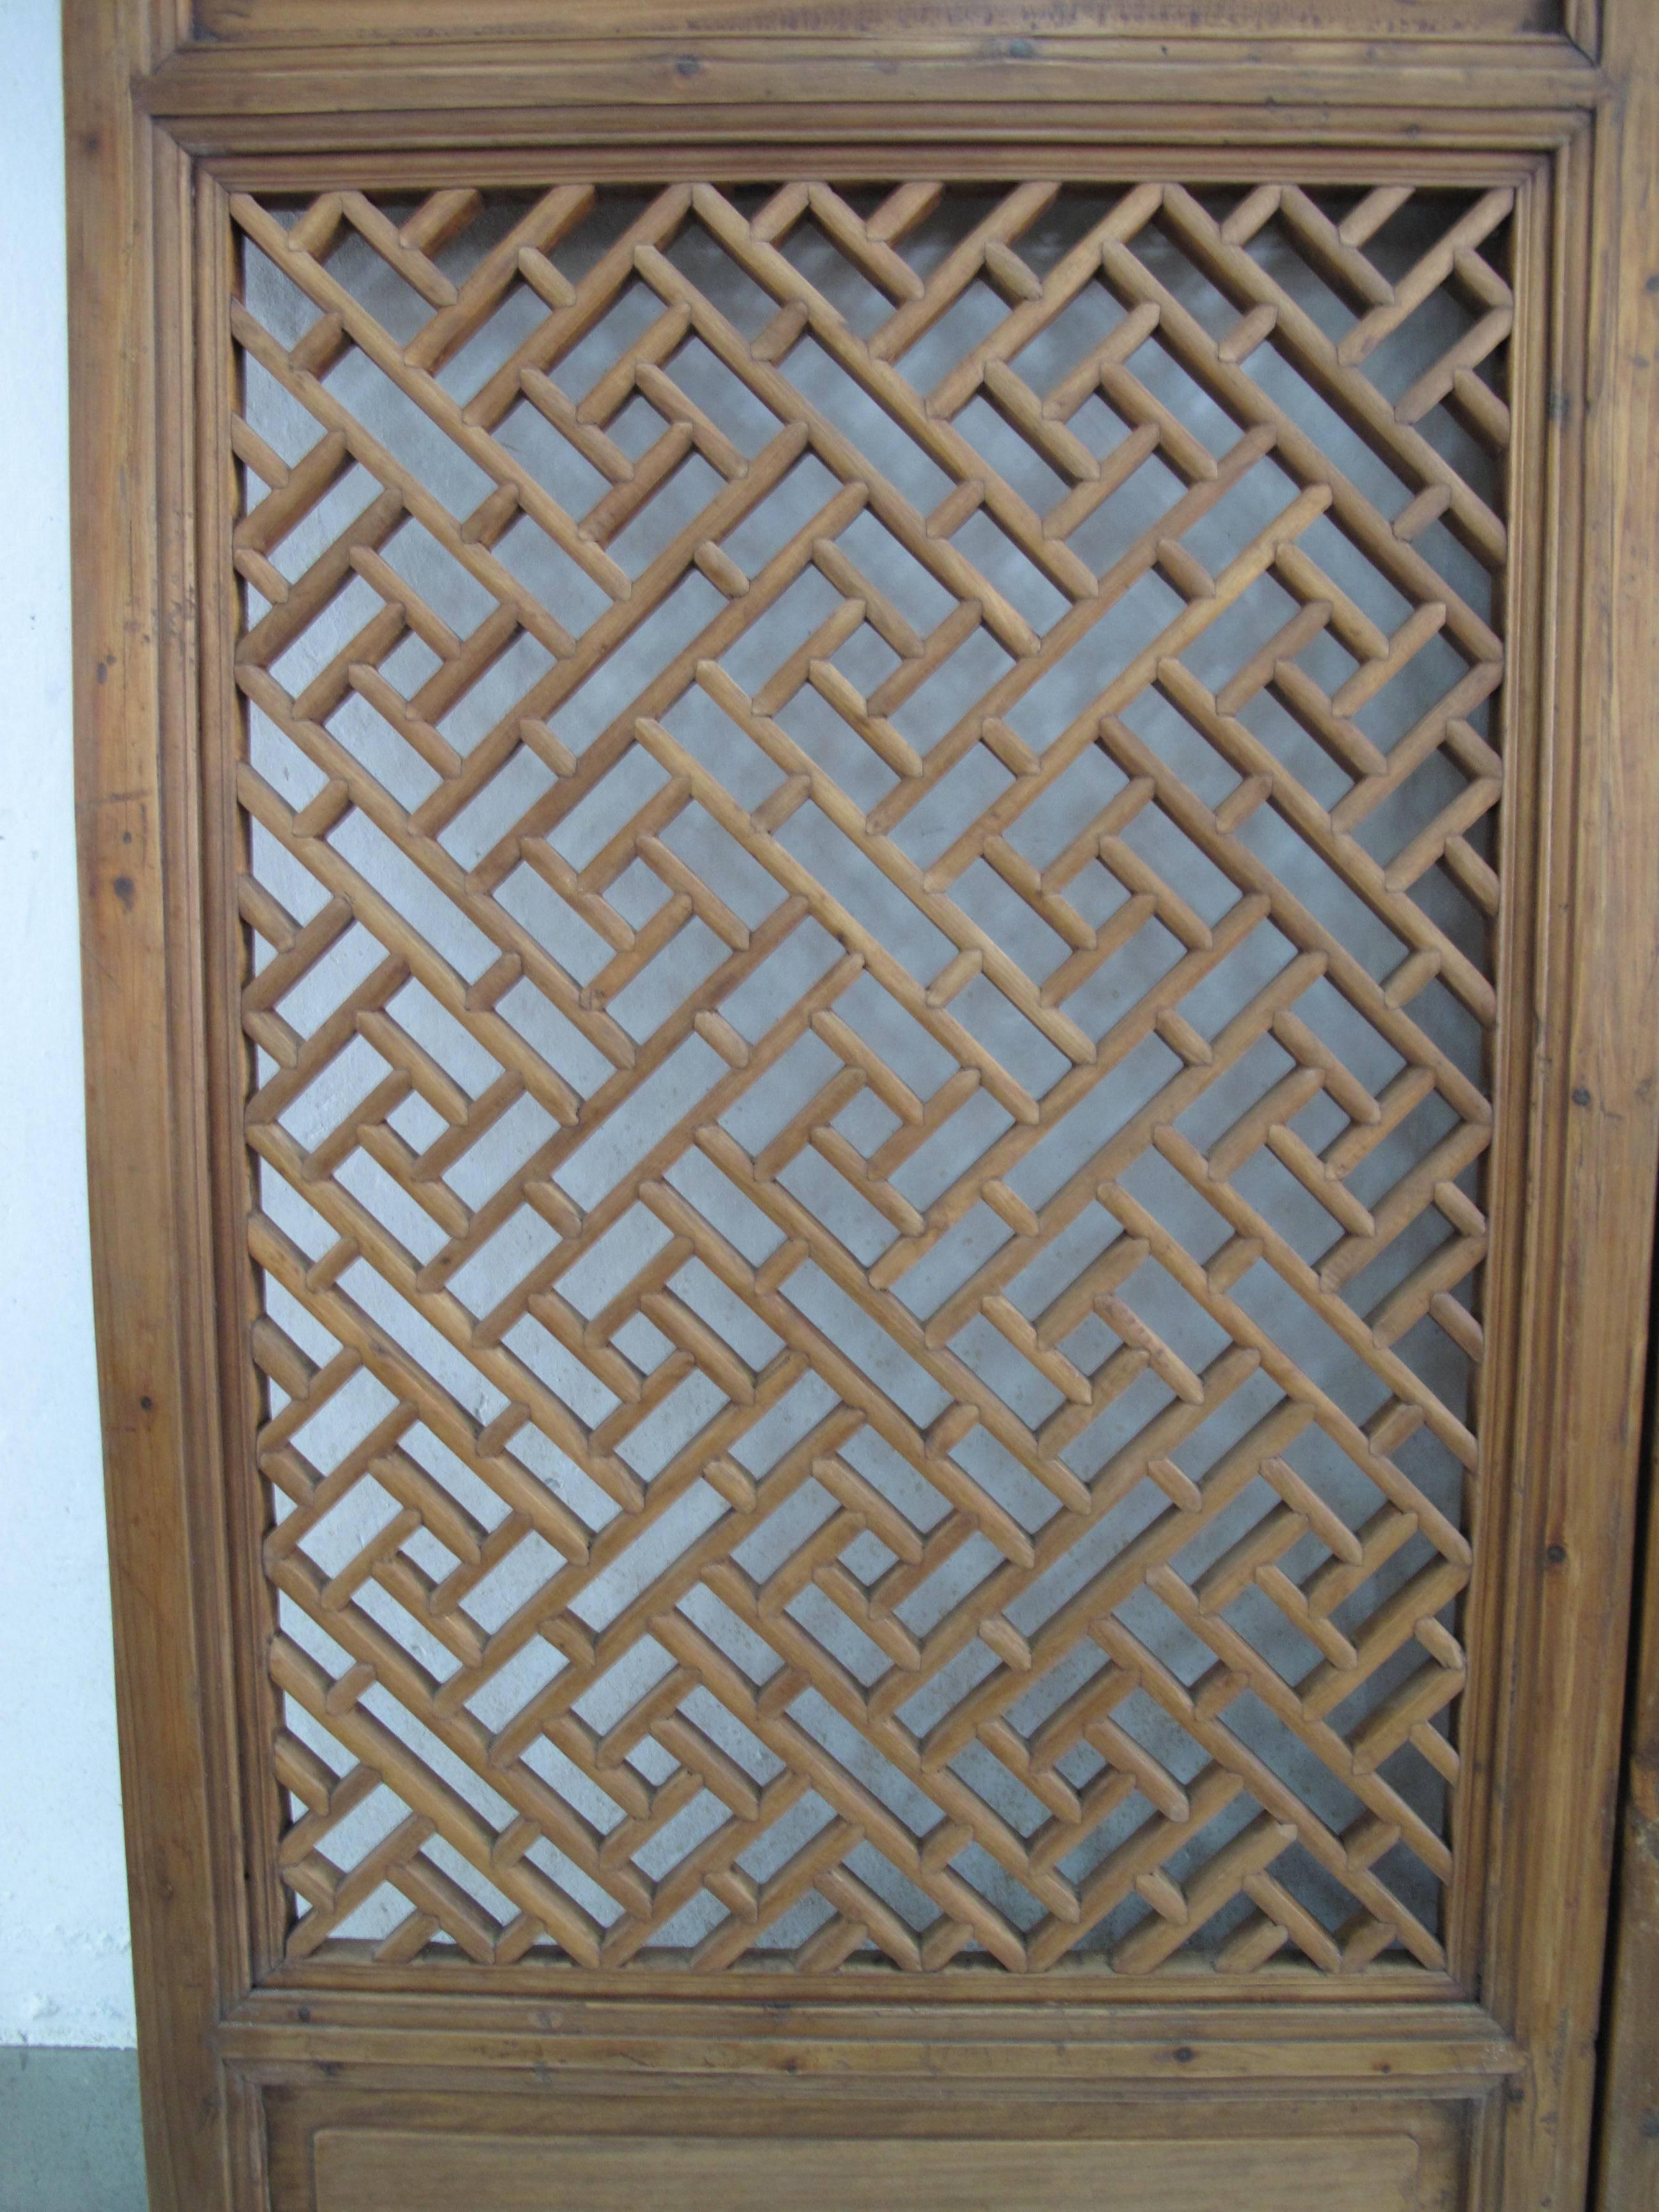 A pair of window screen with floral trailing plant motif on the top frame, and geometric lattice panel and bottom frame panel. Early 19th century, from Dongyang, Zhejiang Province. Camphor and fir wood.